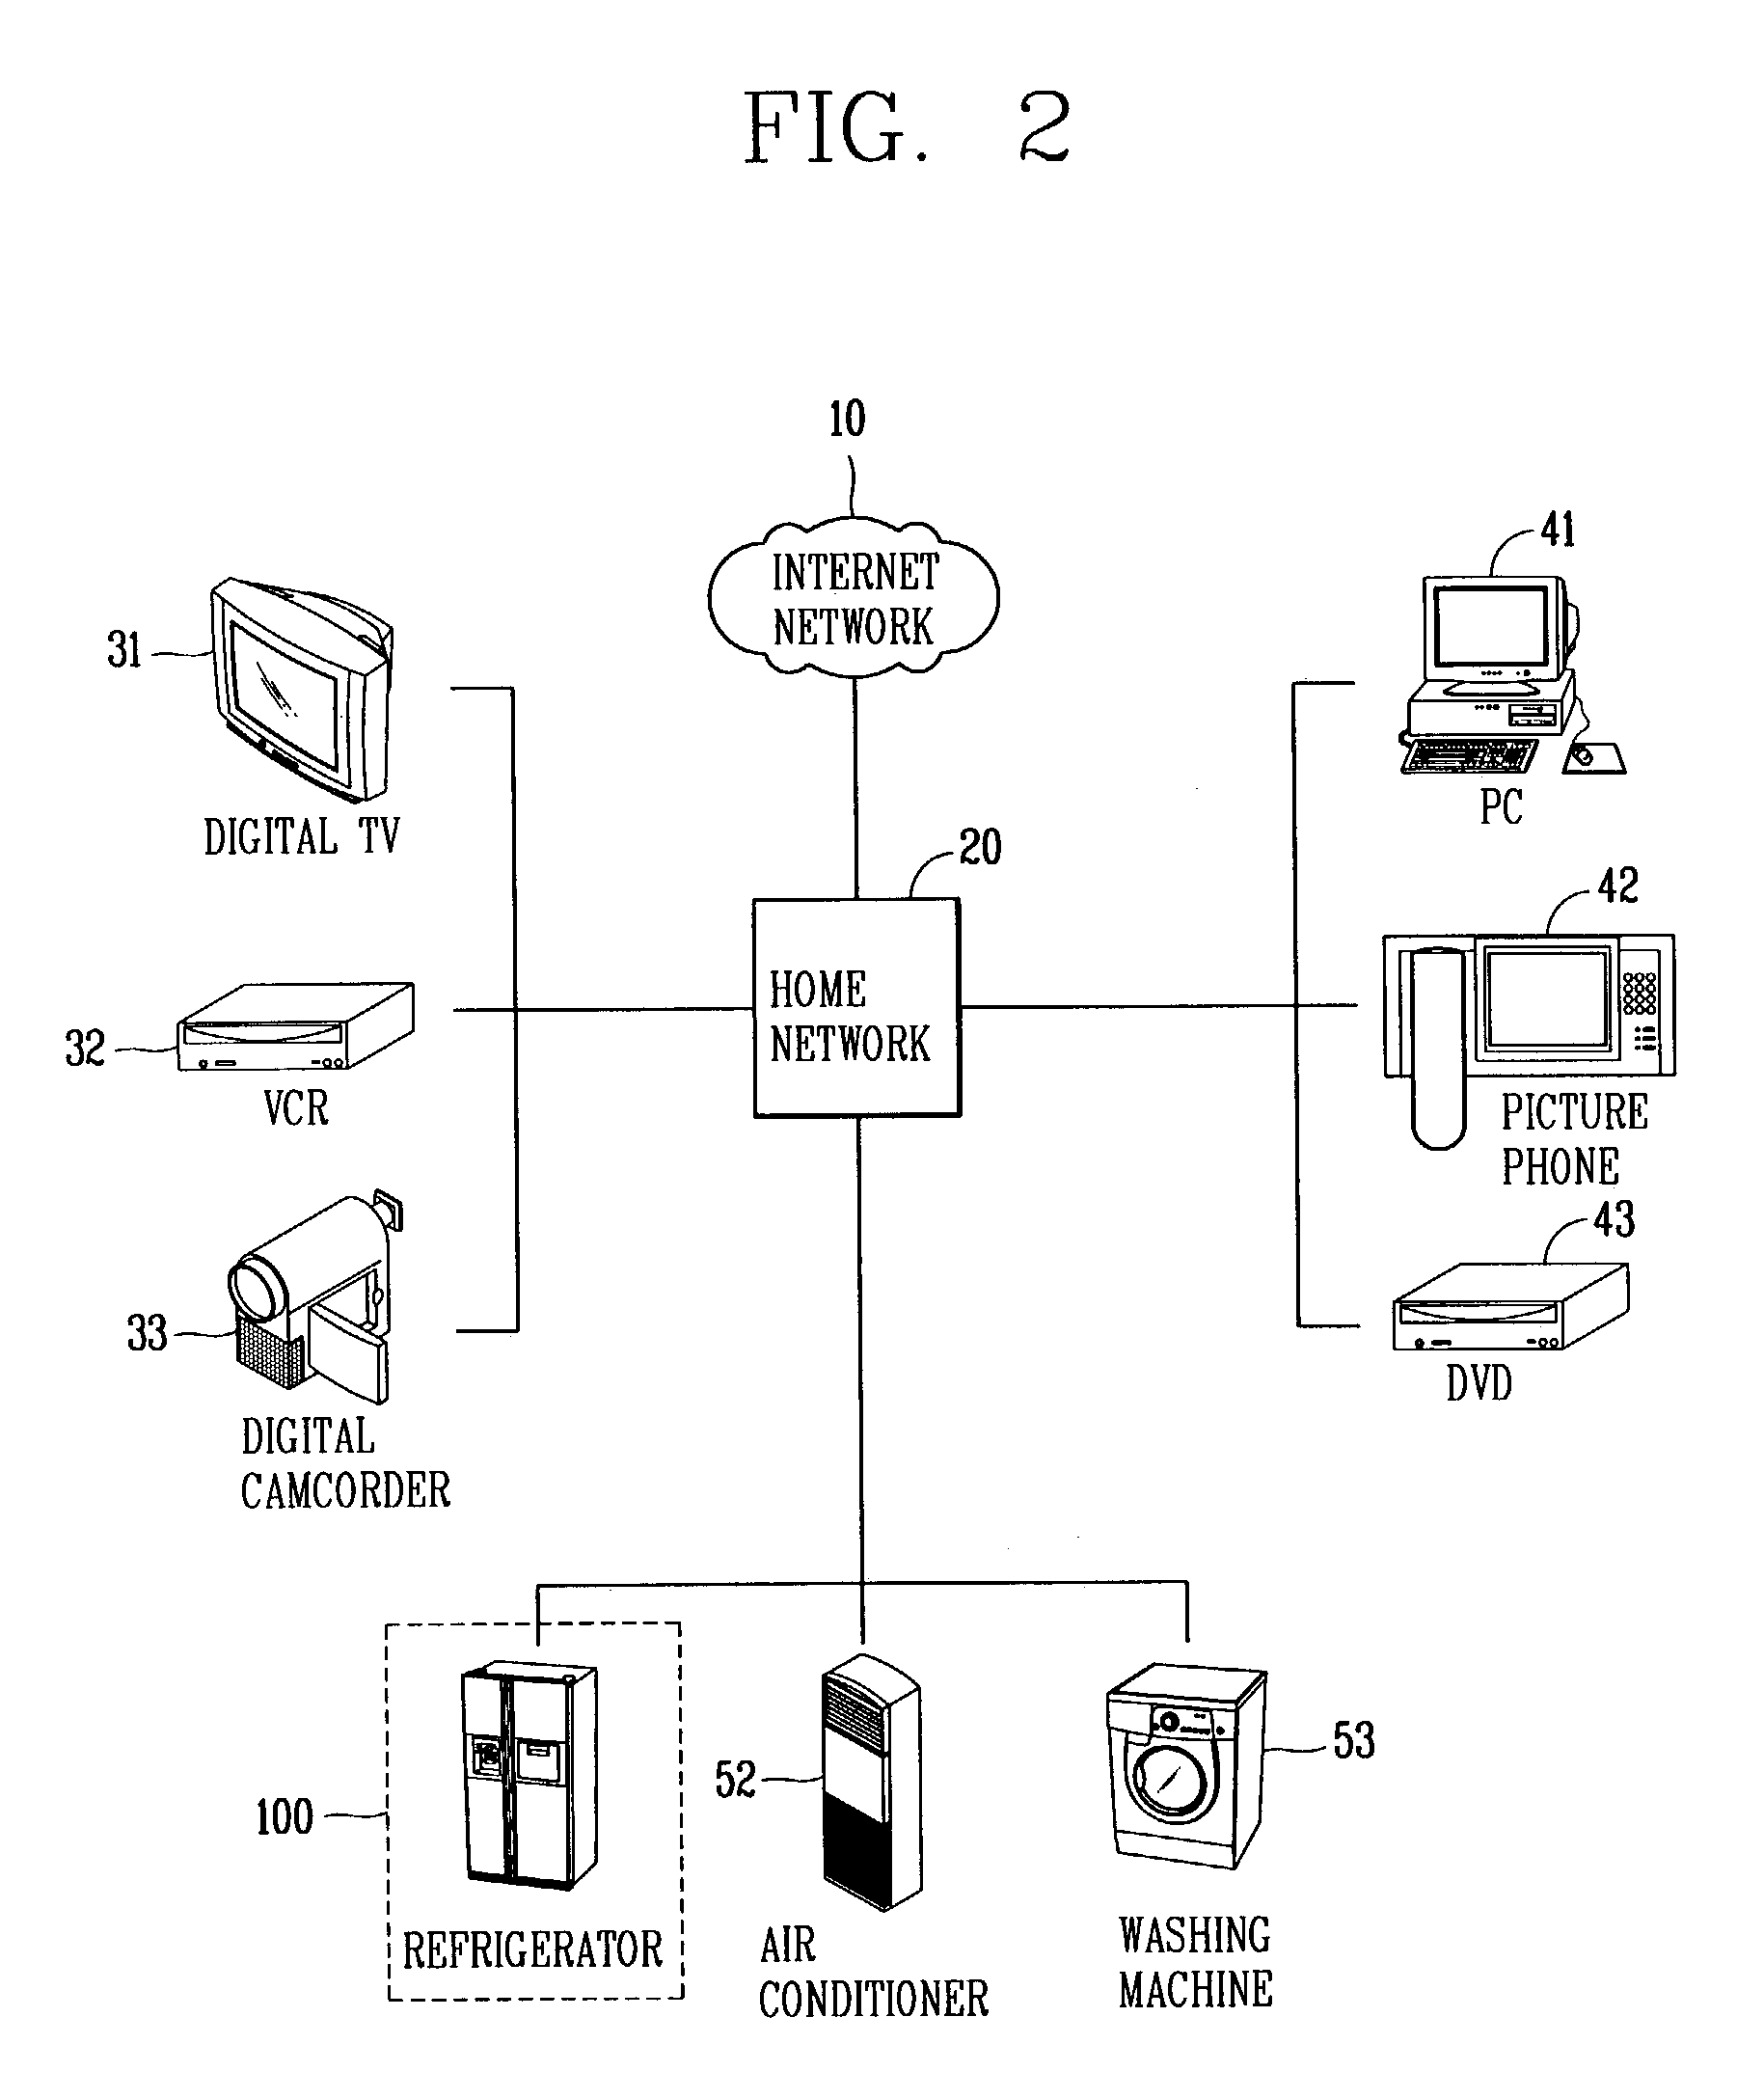 Method for deciding network manager in home network